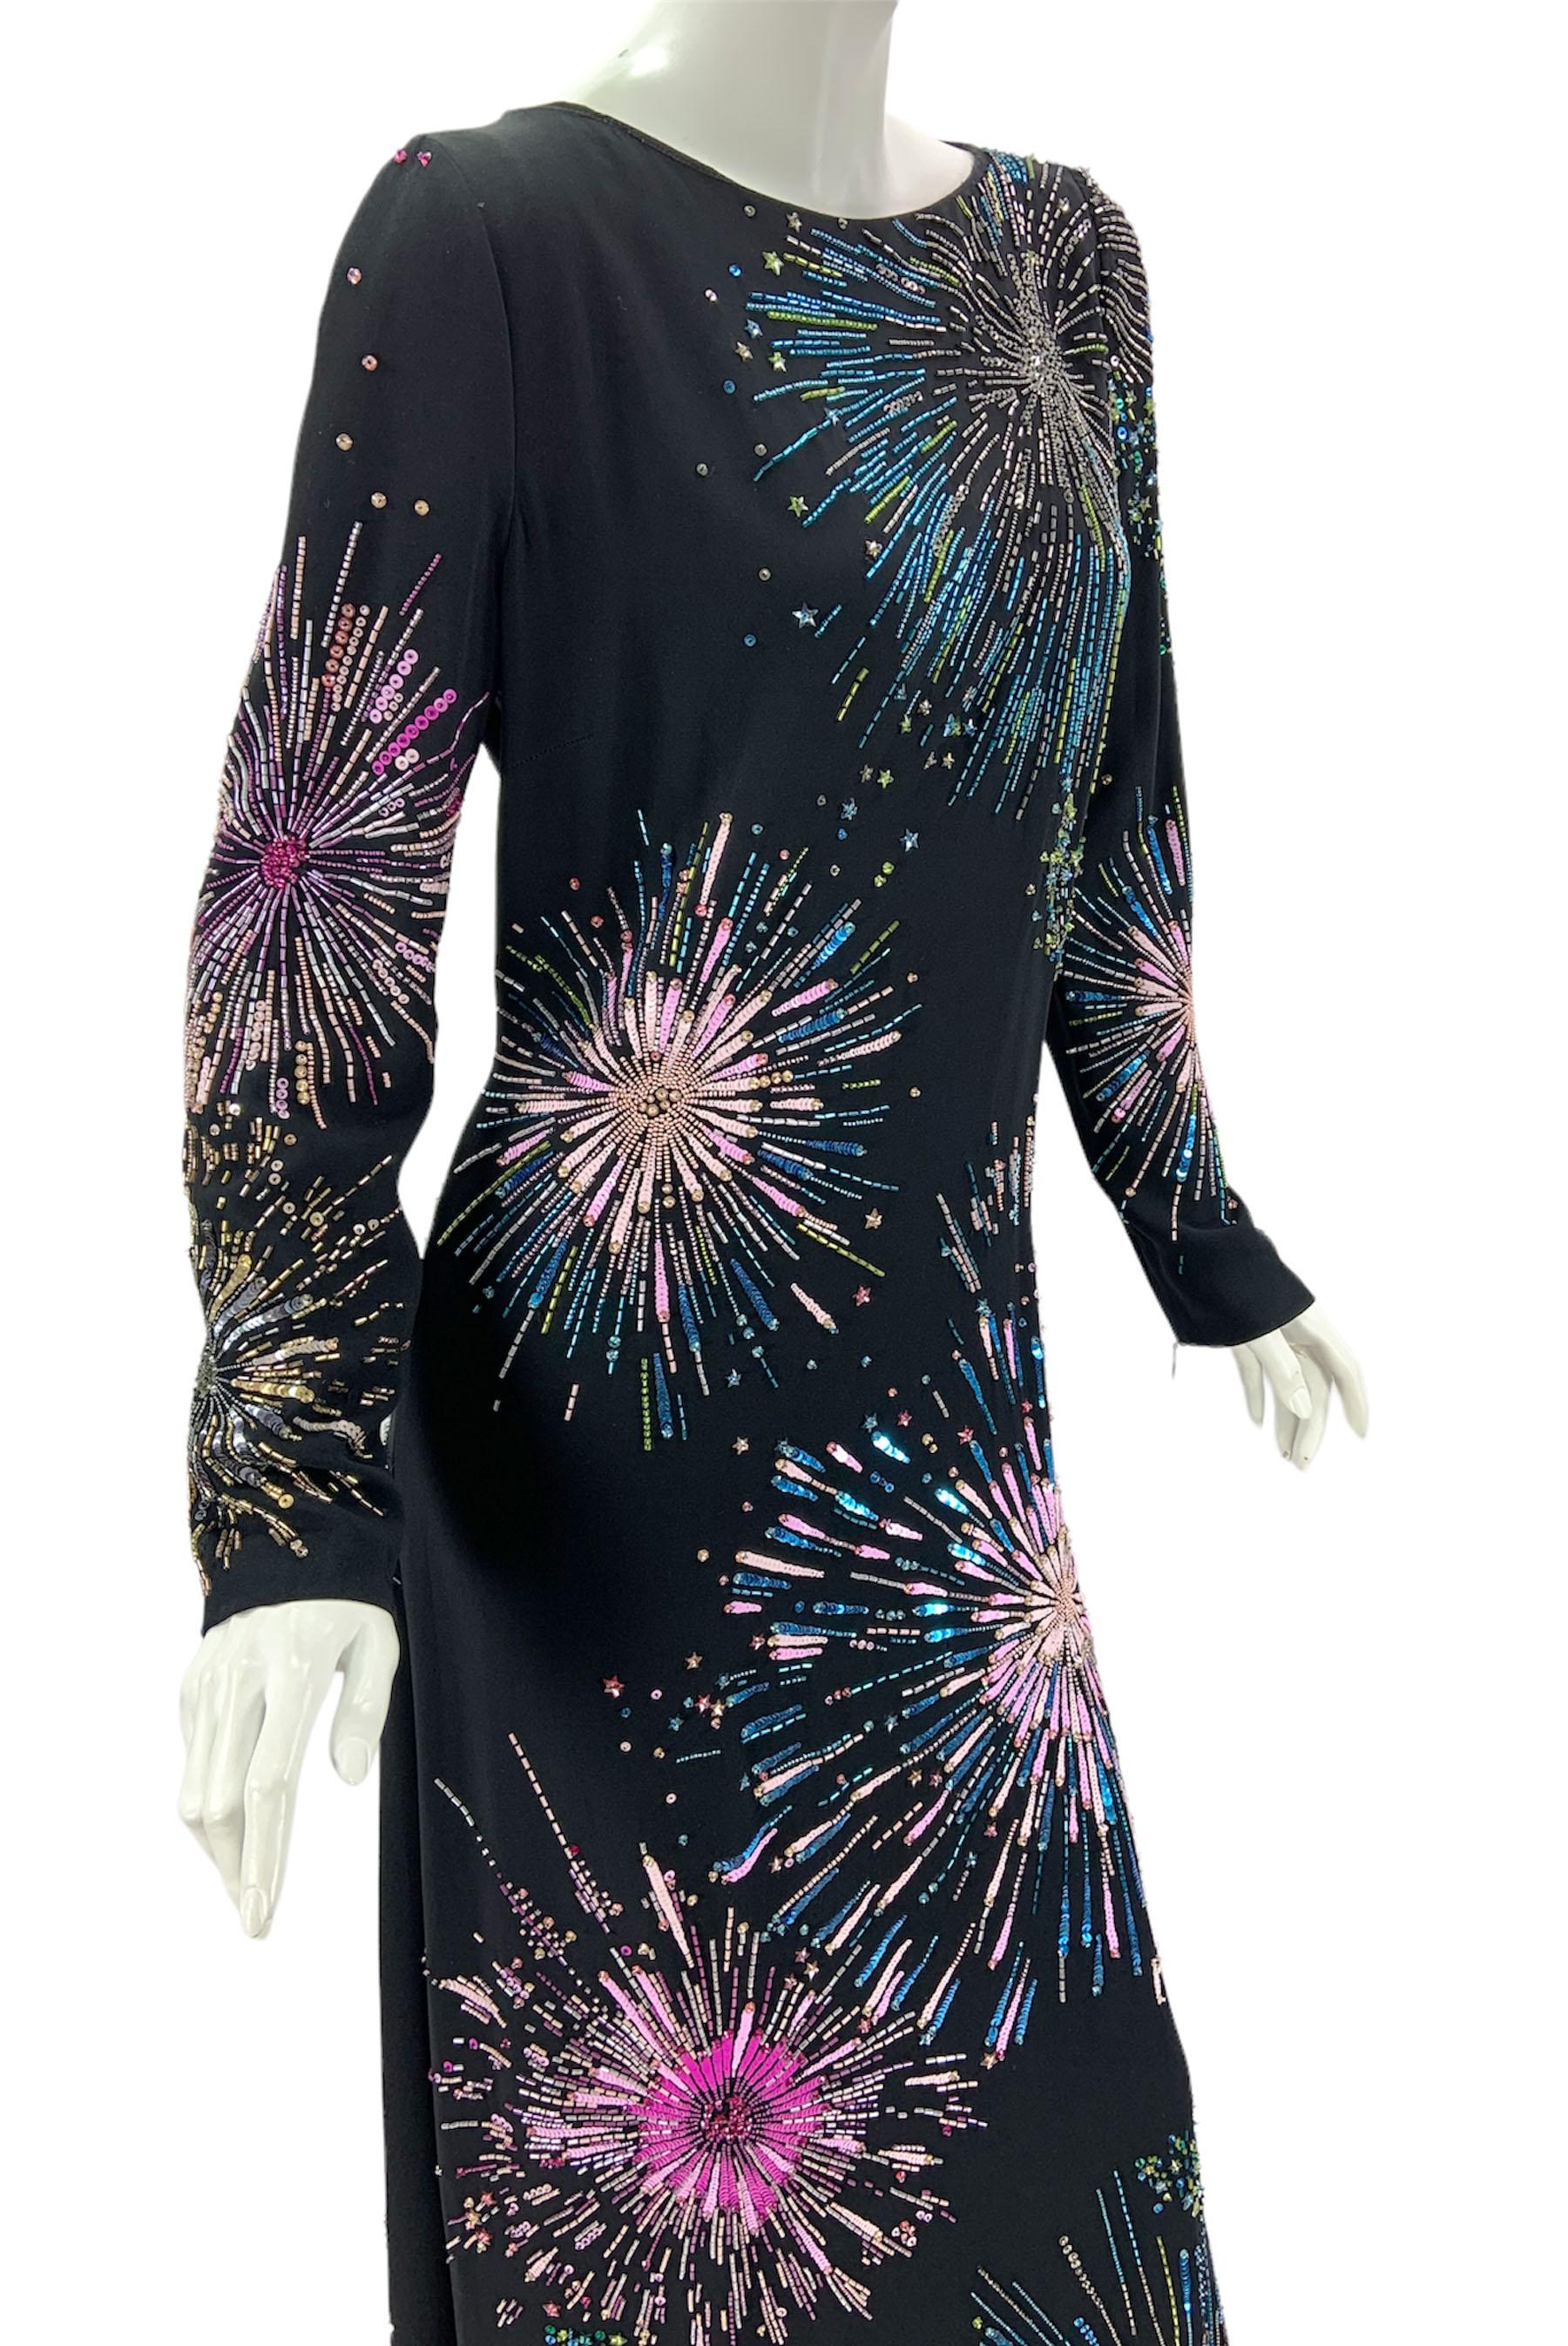 Roberto Cavalli *Firework* Fully Embellished Black Dress Gown It 46 - US 10/12 For Sale 2